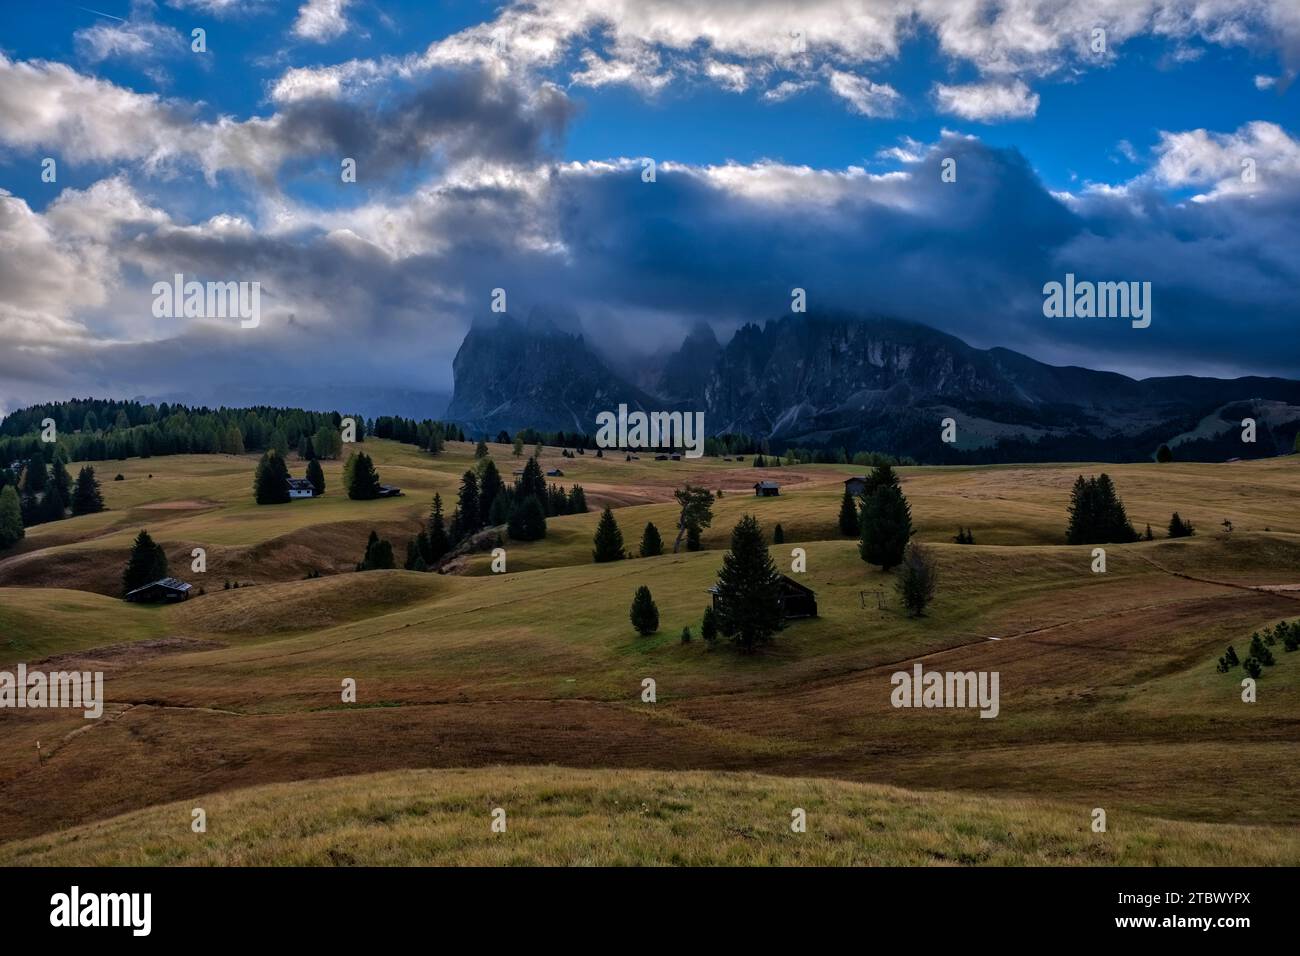 Hilly agricultural countryside with wooden huts and trees at Seiser Alm, Alpe di Siusi, in autumn at sunrise. Stock Photo